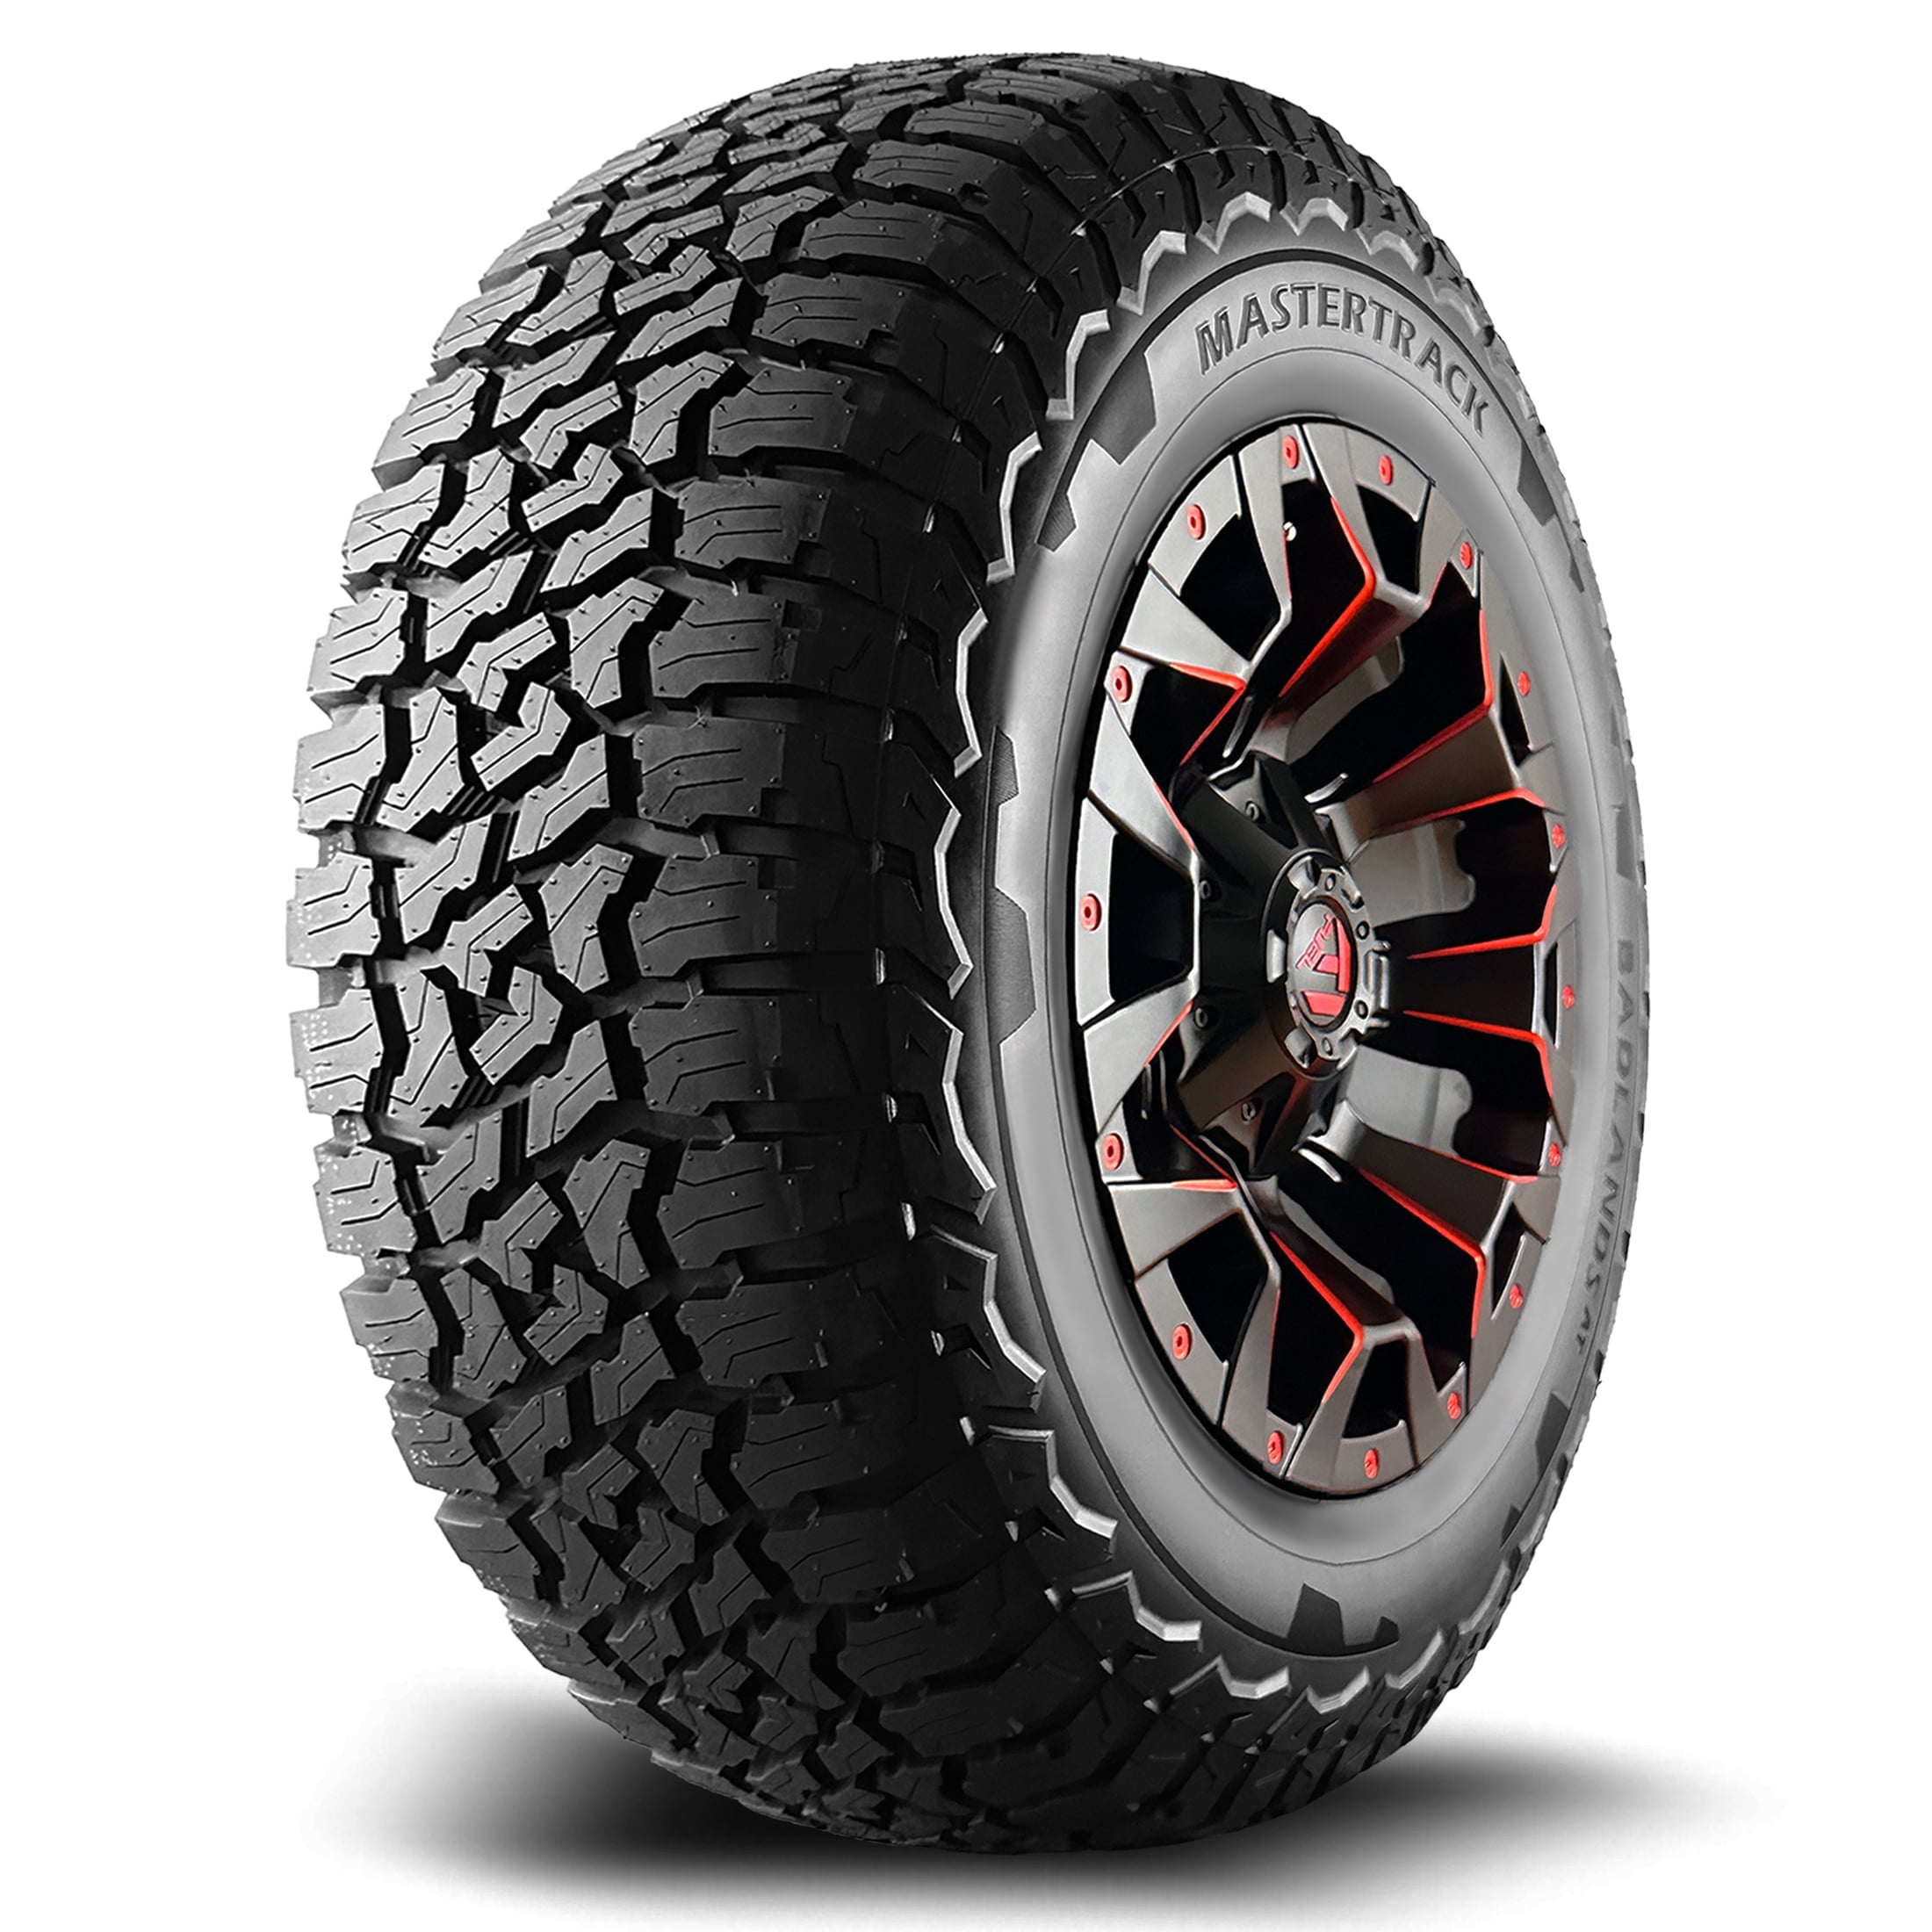 Mastertrack BADLANDS AT All Terrain LT275/65R20 10 Ply E 126S SUV Light  Truck Tire 275/65/20(Tire Only)